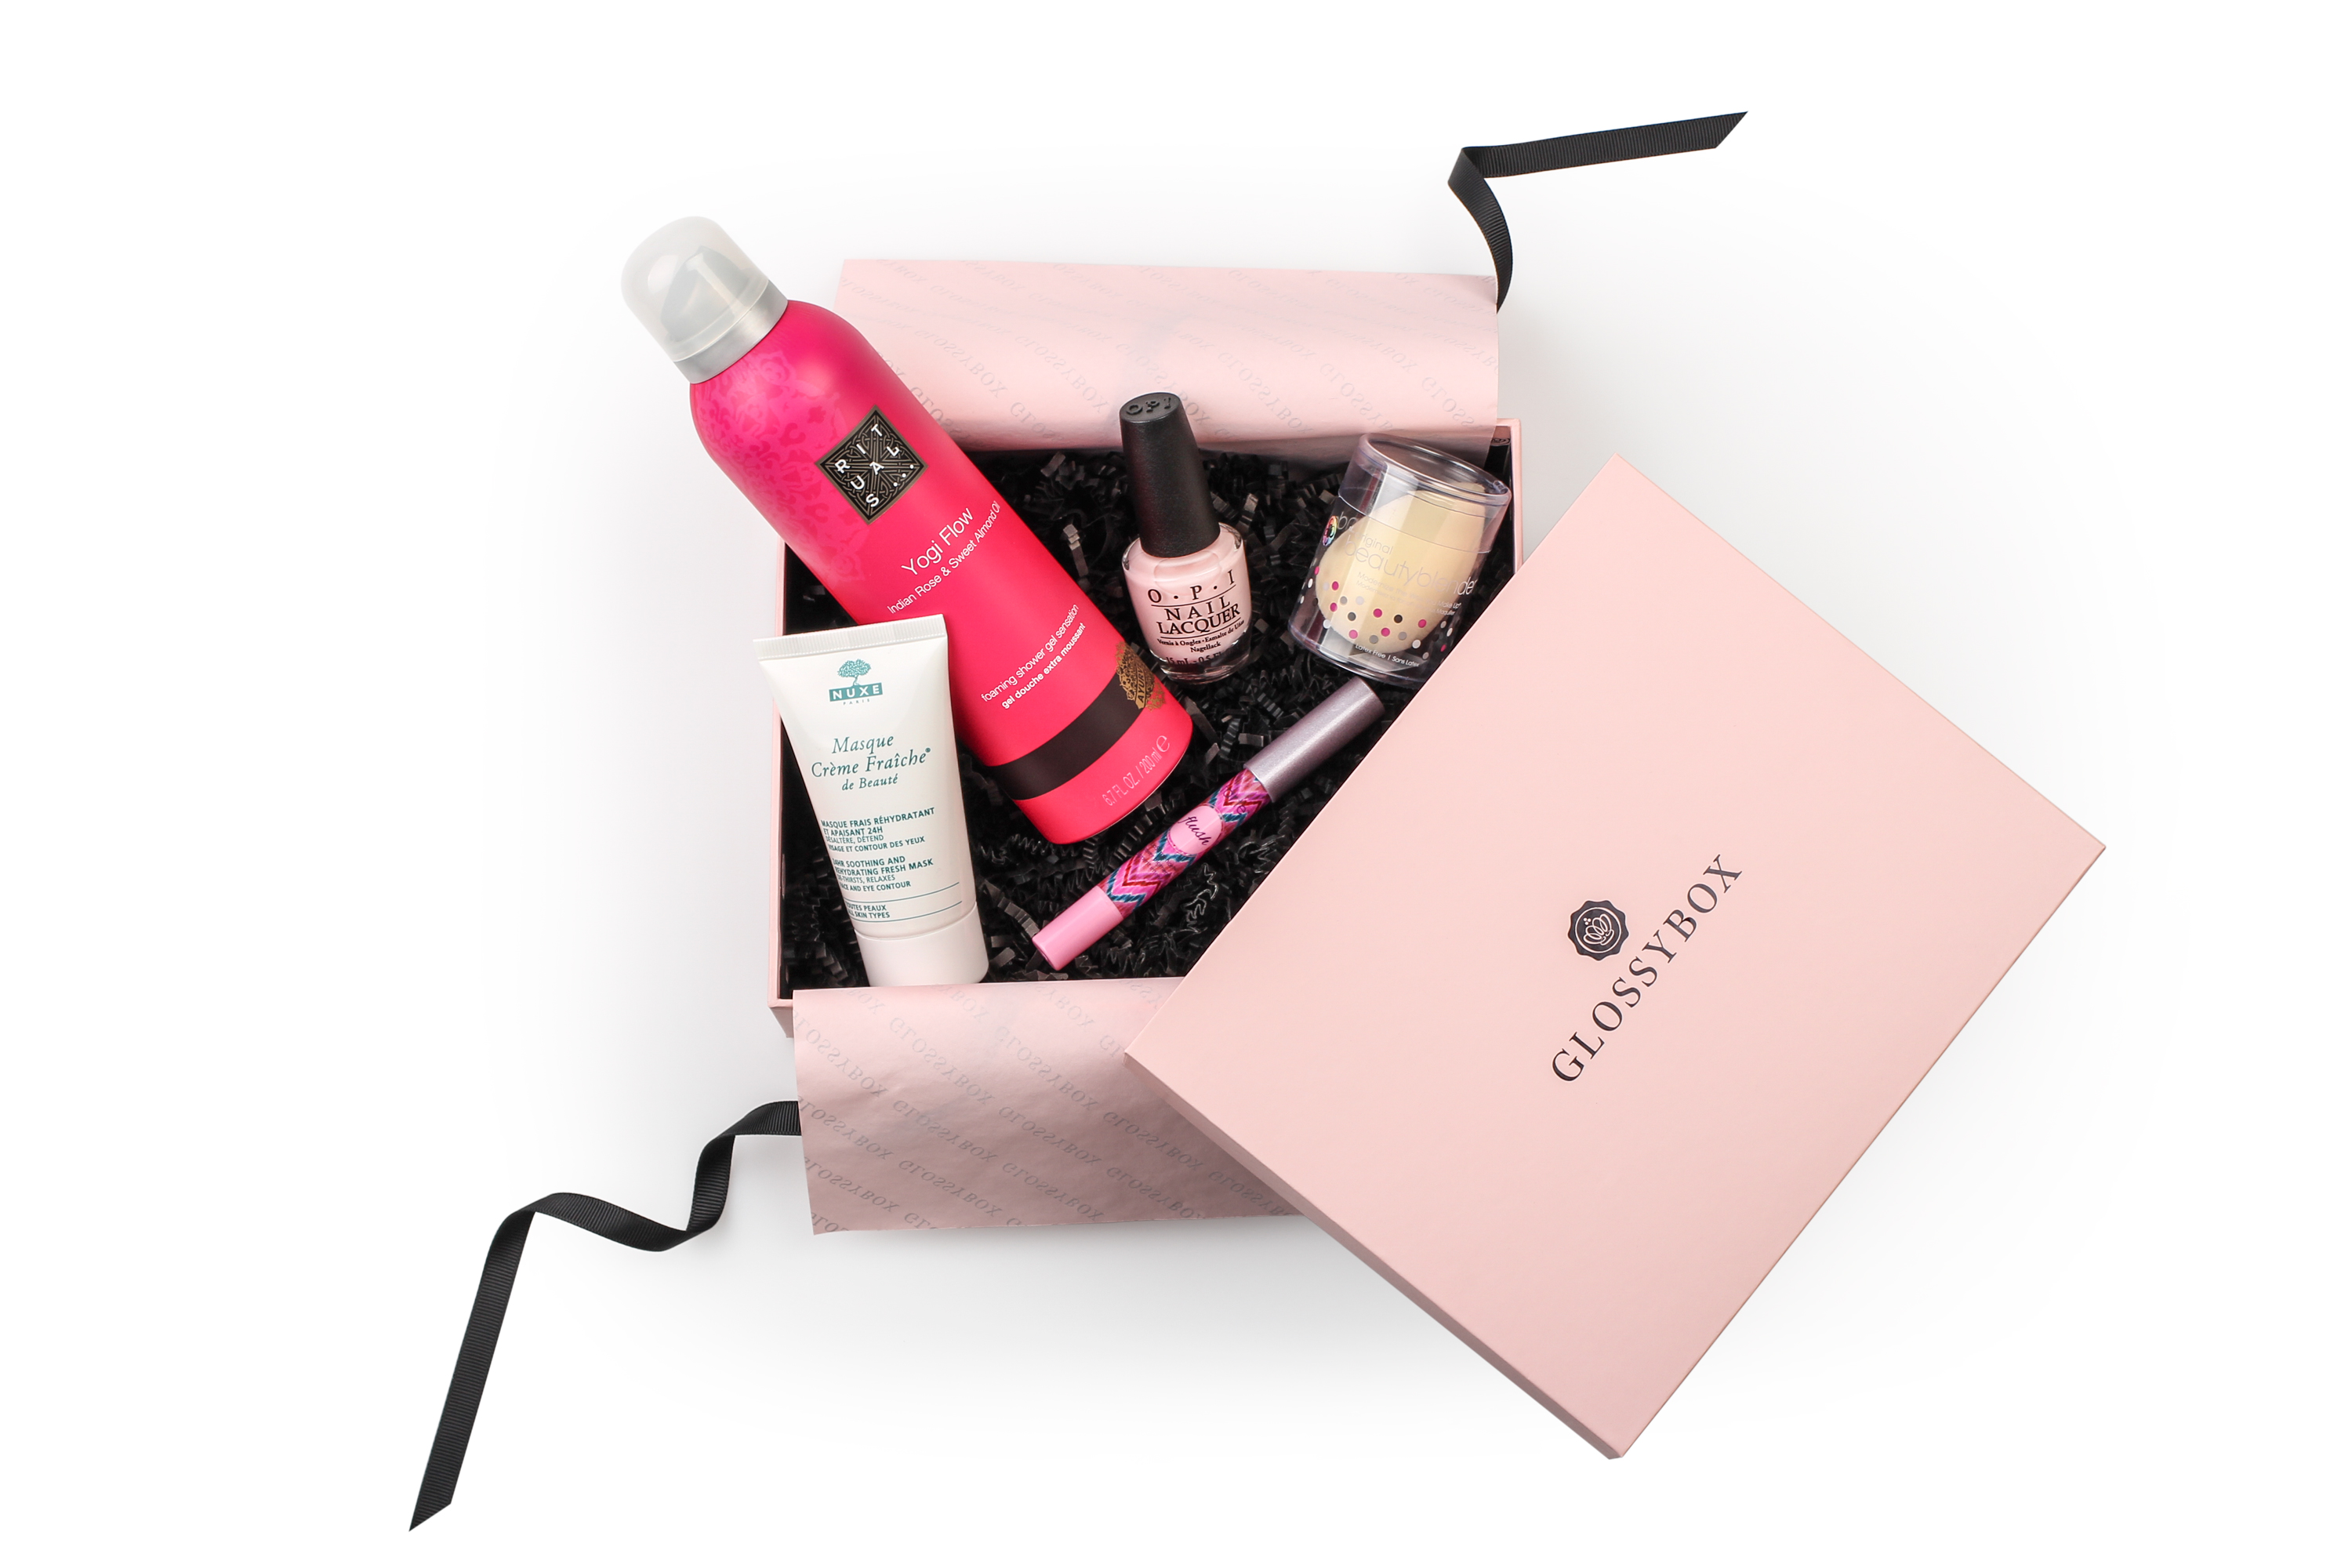 The classic pink GLOSSYBOX